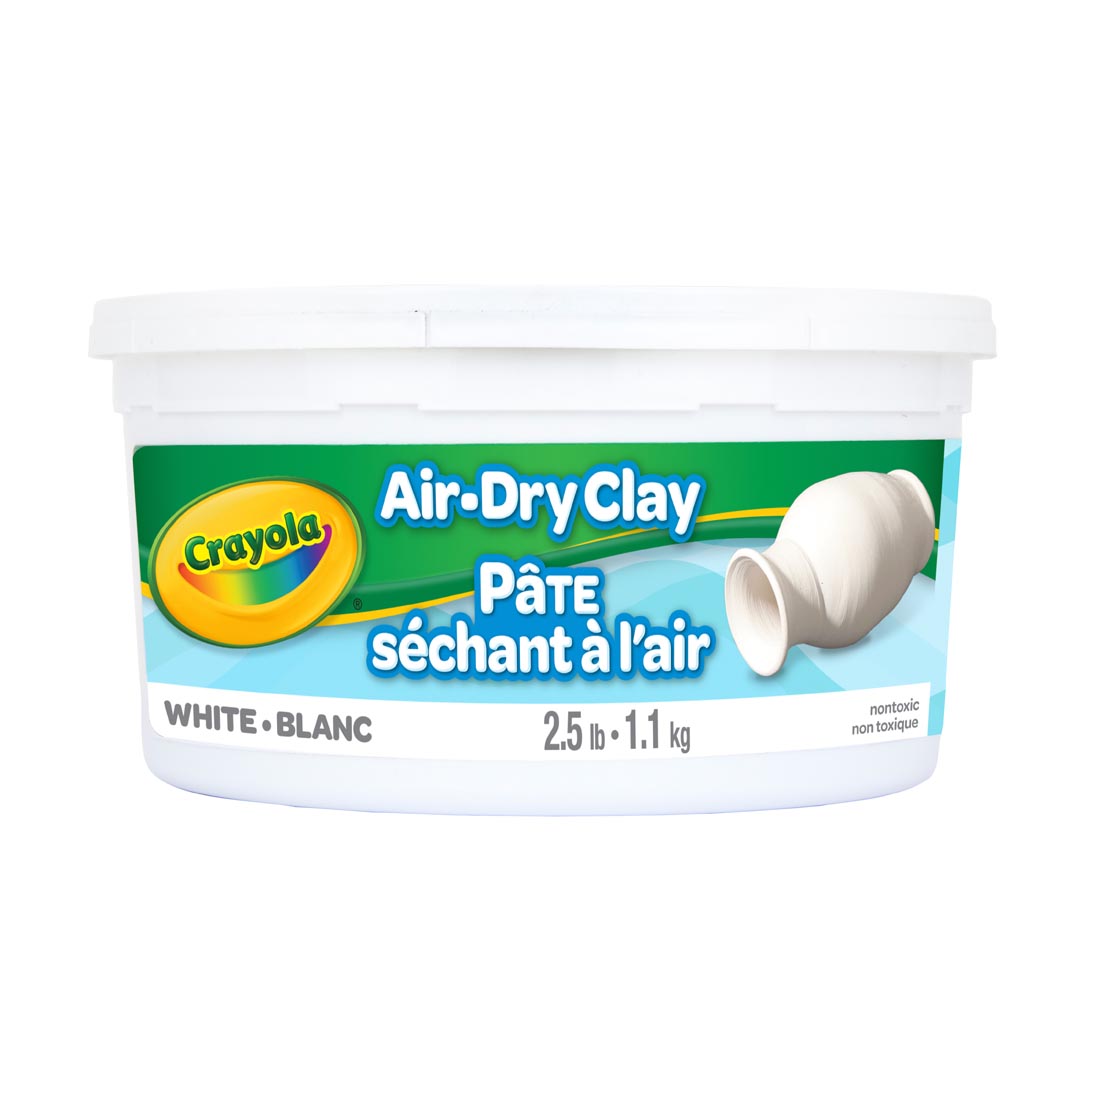 Package of White Crayola Air-Dry Clay